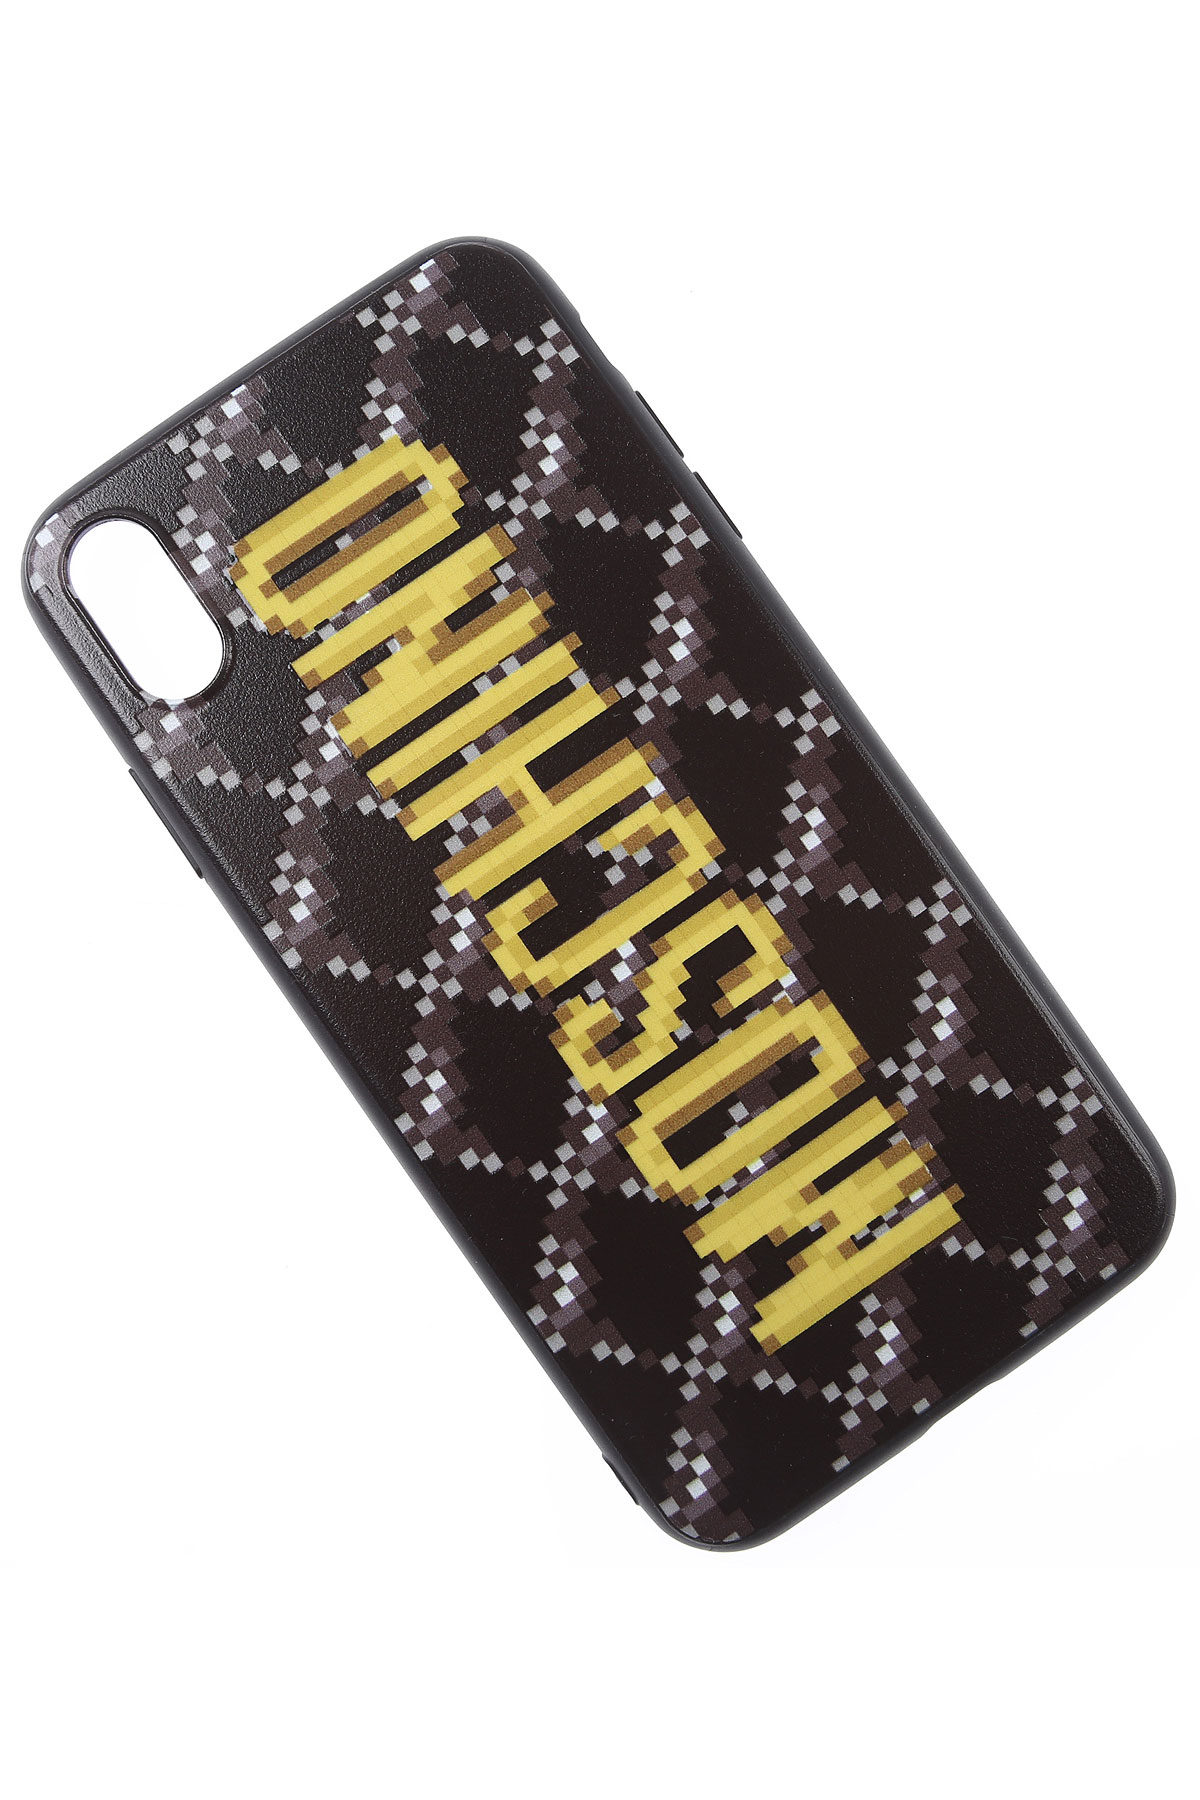 iPhone Cases Moschino, Style code: a7979-8351-1555